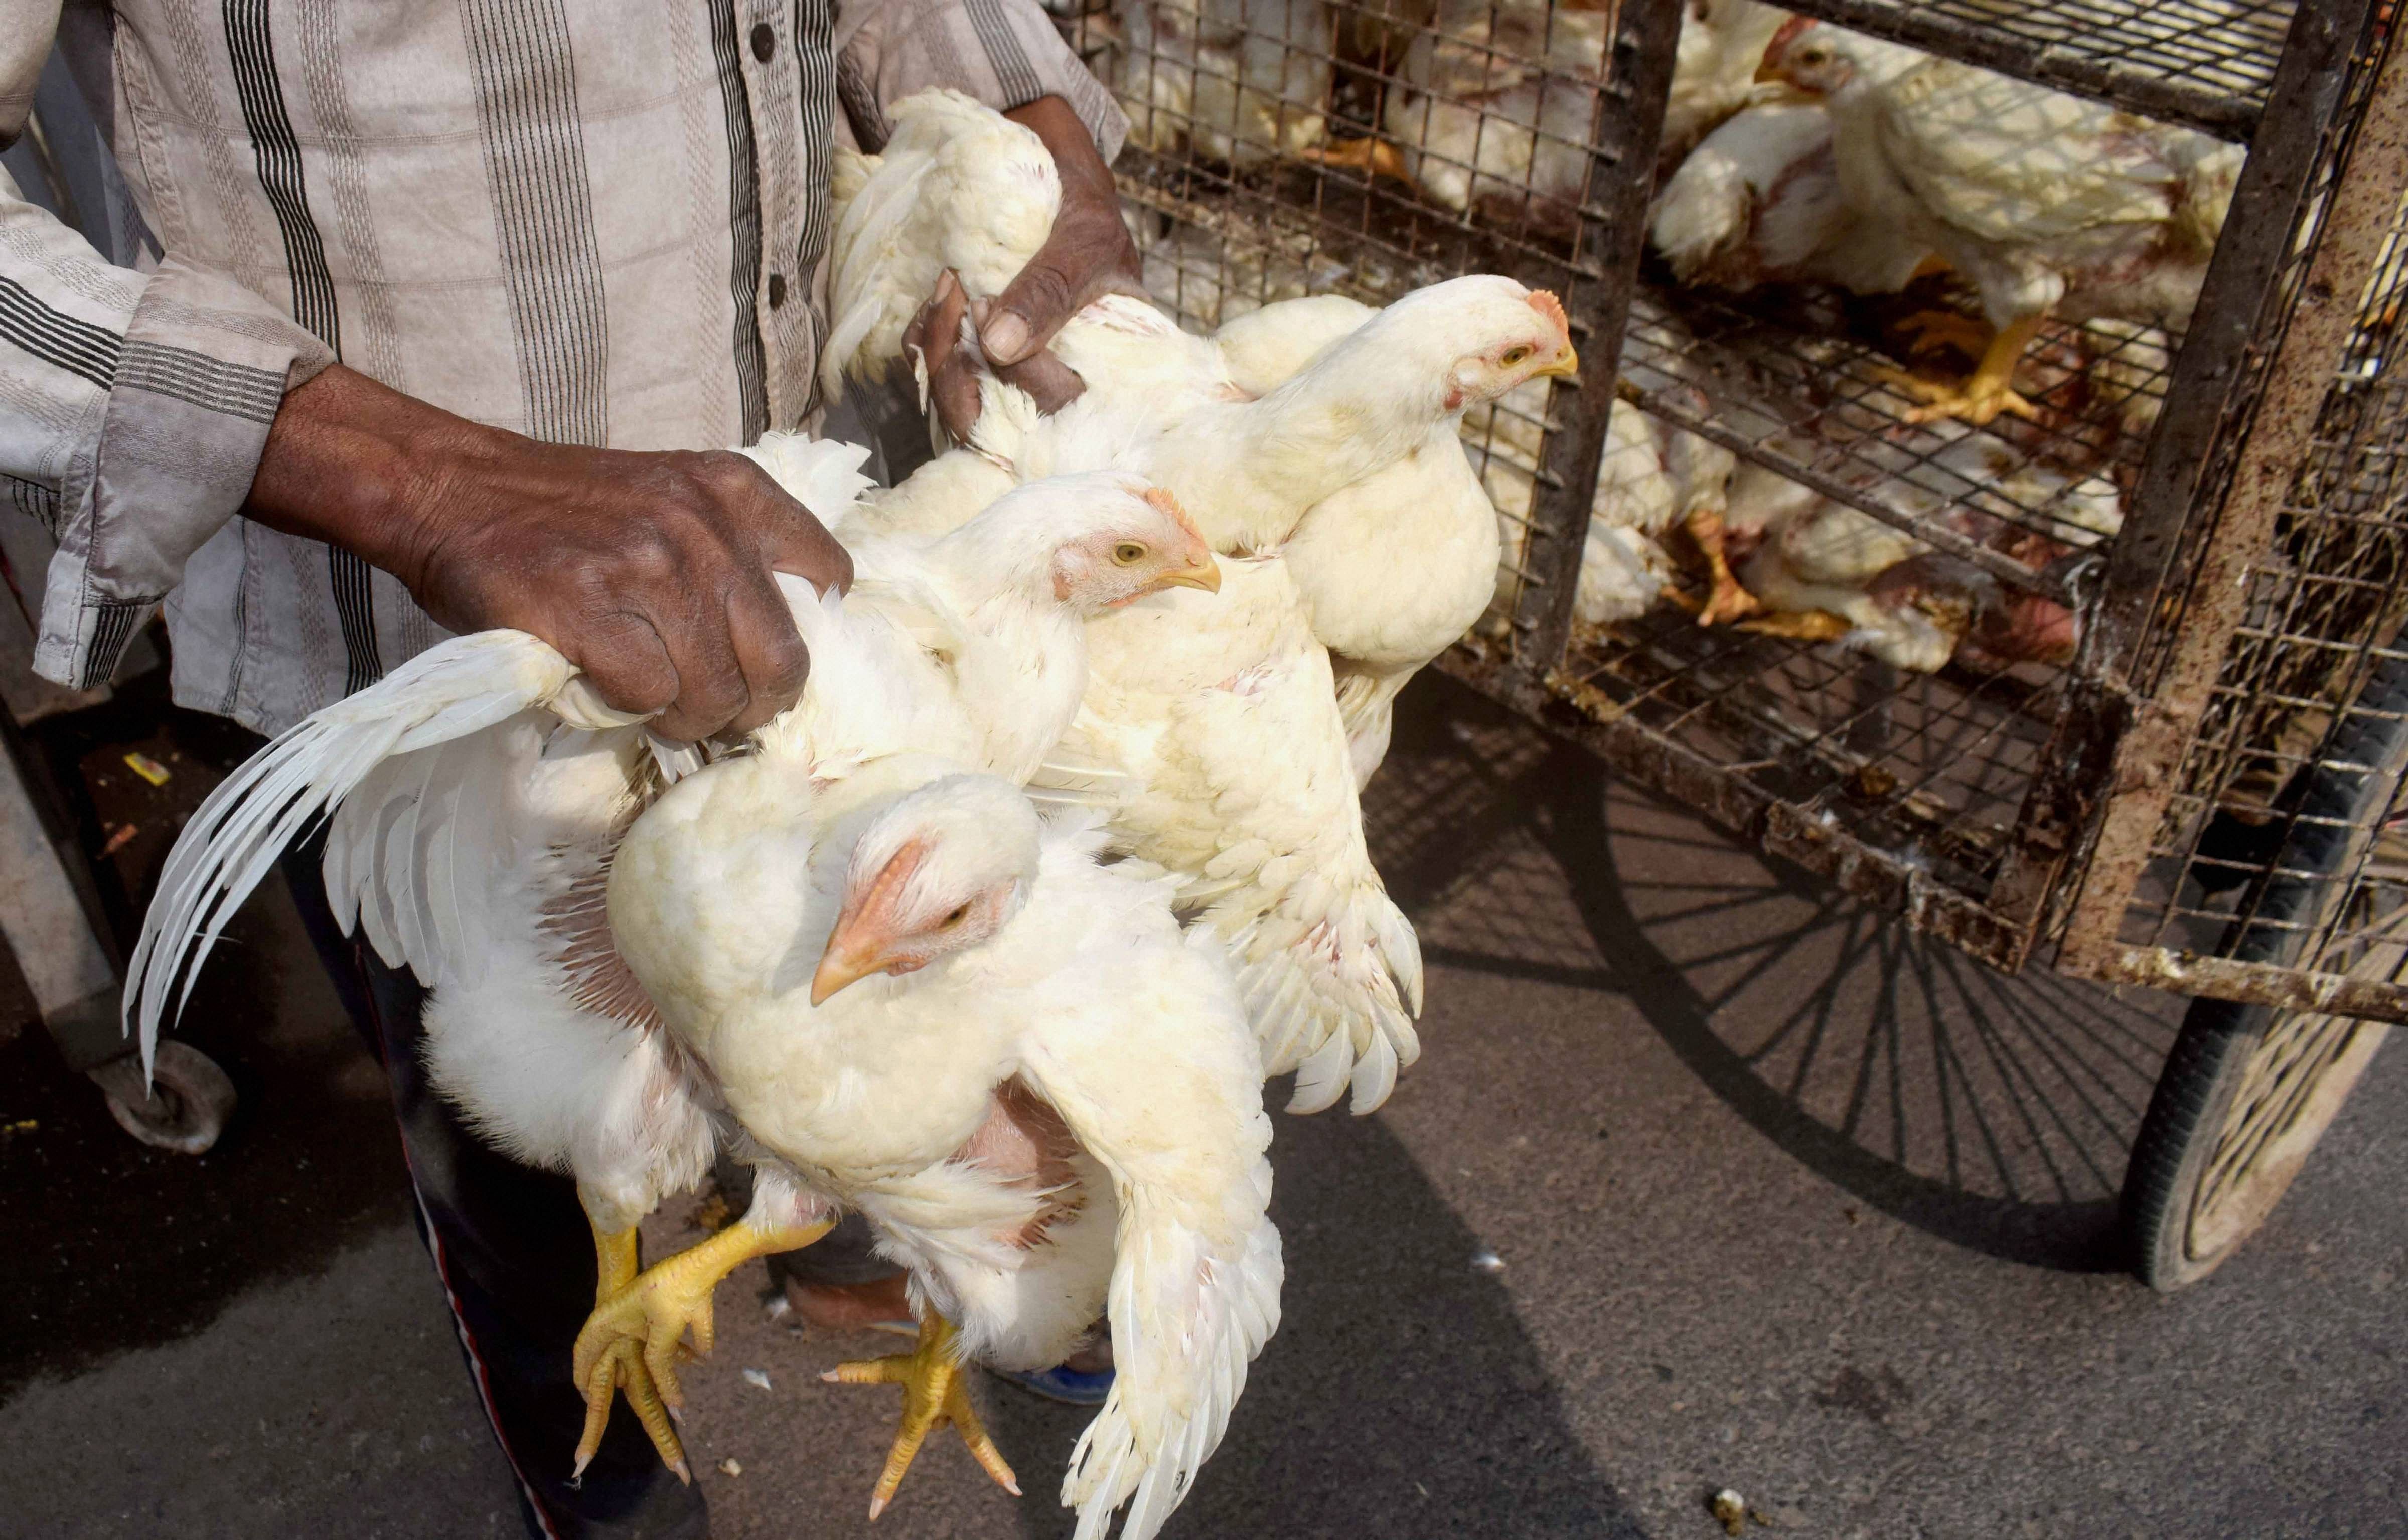 A vendor carries chickens at a livestock market in Prayagraj, Friday, Jan. 8, 2021. An alert has been sounded in several states following the detection of bird flu cases in four states of India. Credit: PTI Photo